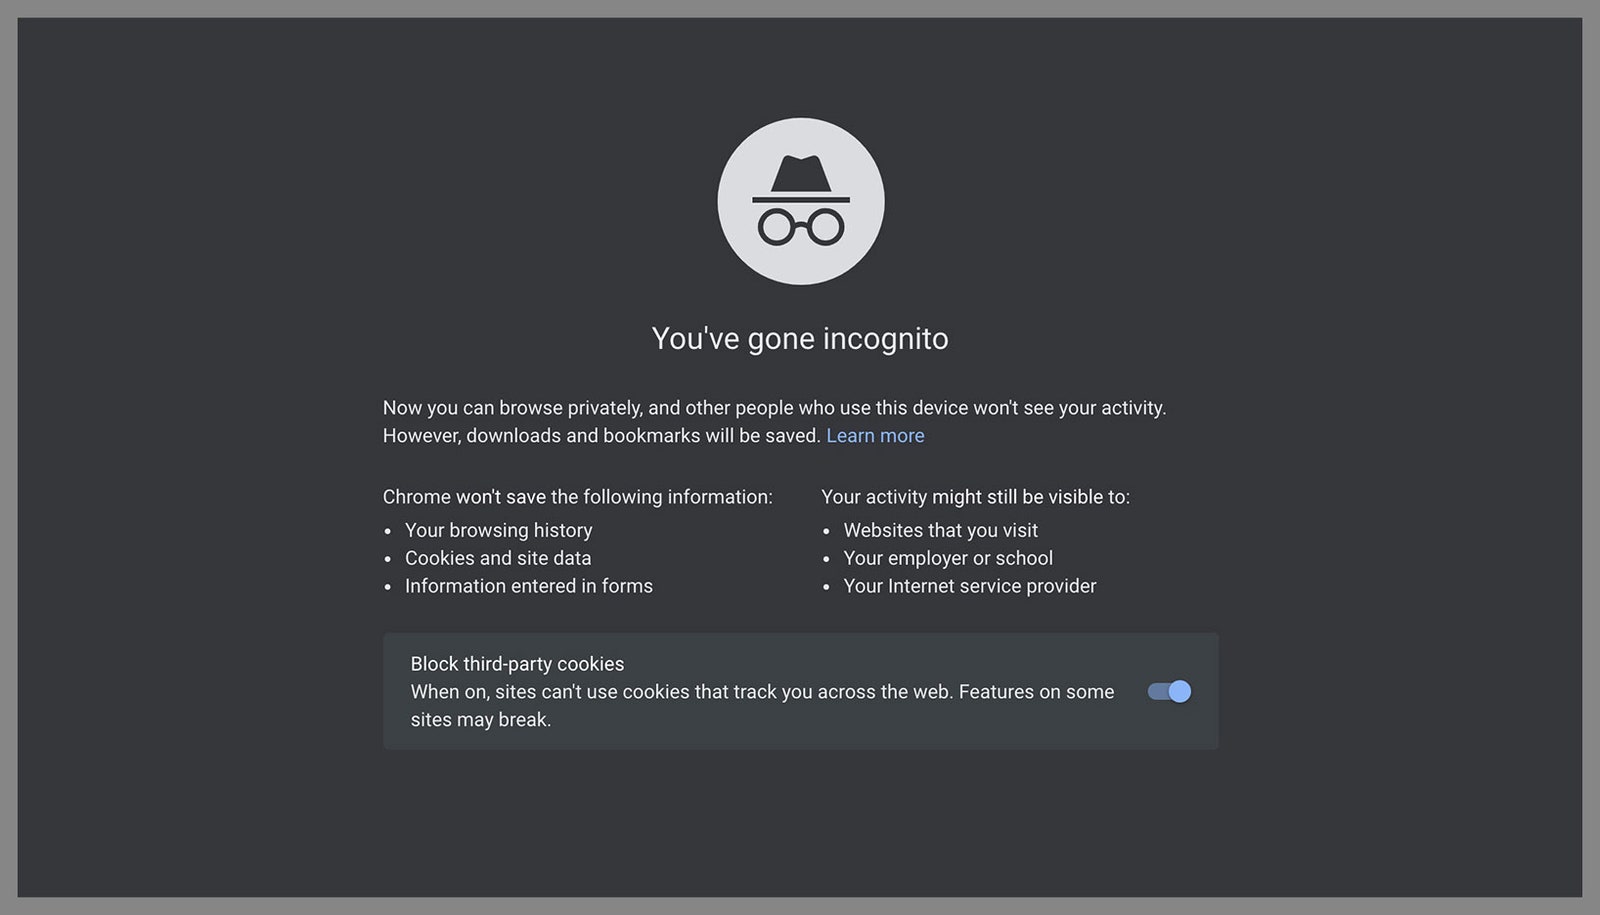 Try accessing the website in incognito mode: Test if the error persists by opening a private browsing window and accessing your website.
Visit a different website: Check if the error occurs only on your website or on other secure websites as well. This can help identify if the issue is specific to your site.